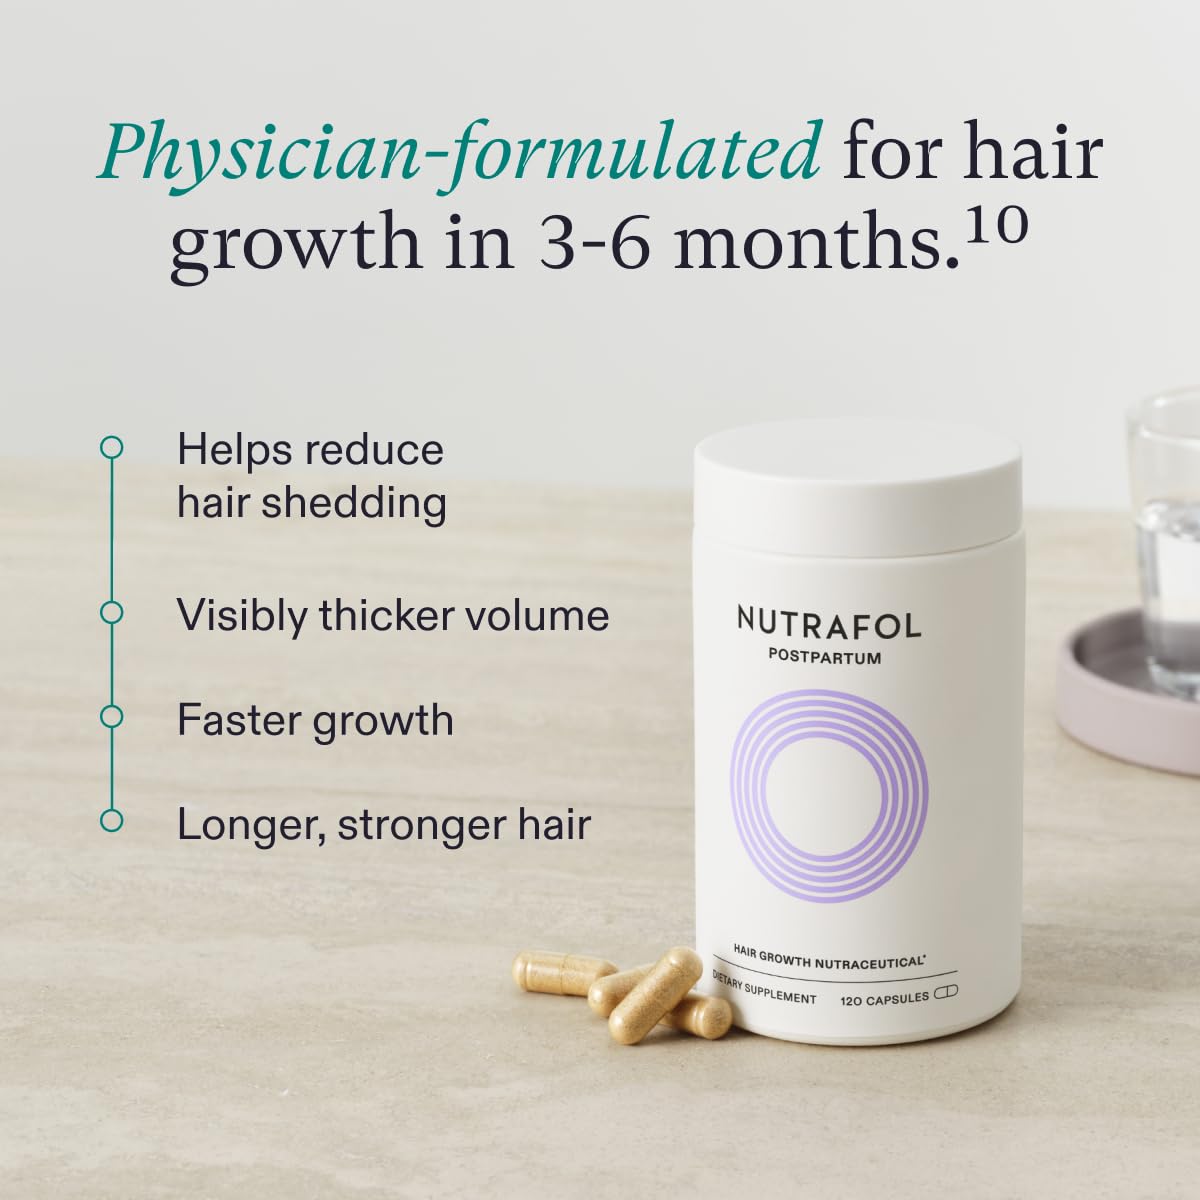 Nutrafol Postpartum Hair Growth Supplements, Clinically Tested for Visibly Thicker Hair and Less Shedding, Breastfeeding-friendly - 3 month supply, Pack of 3